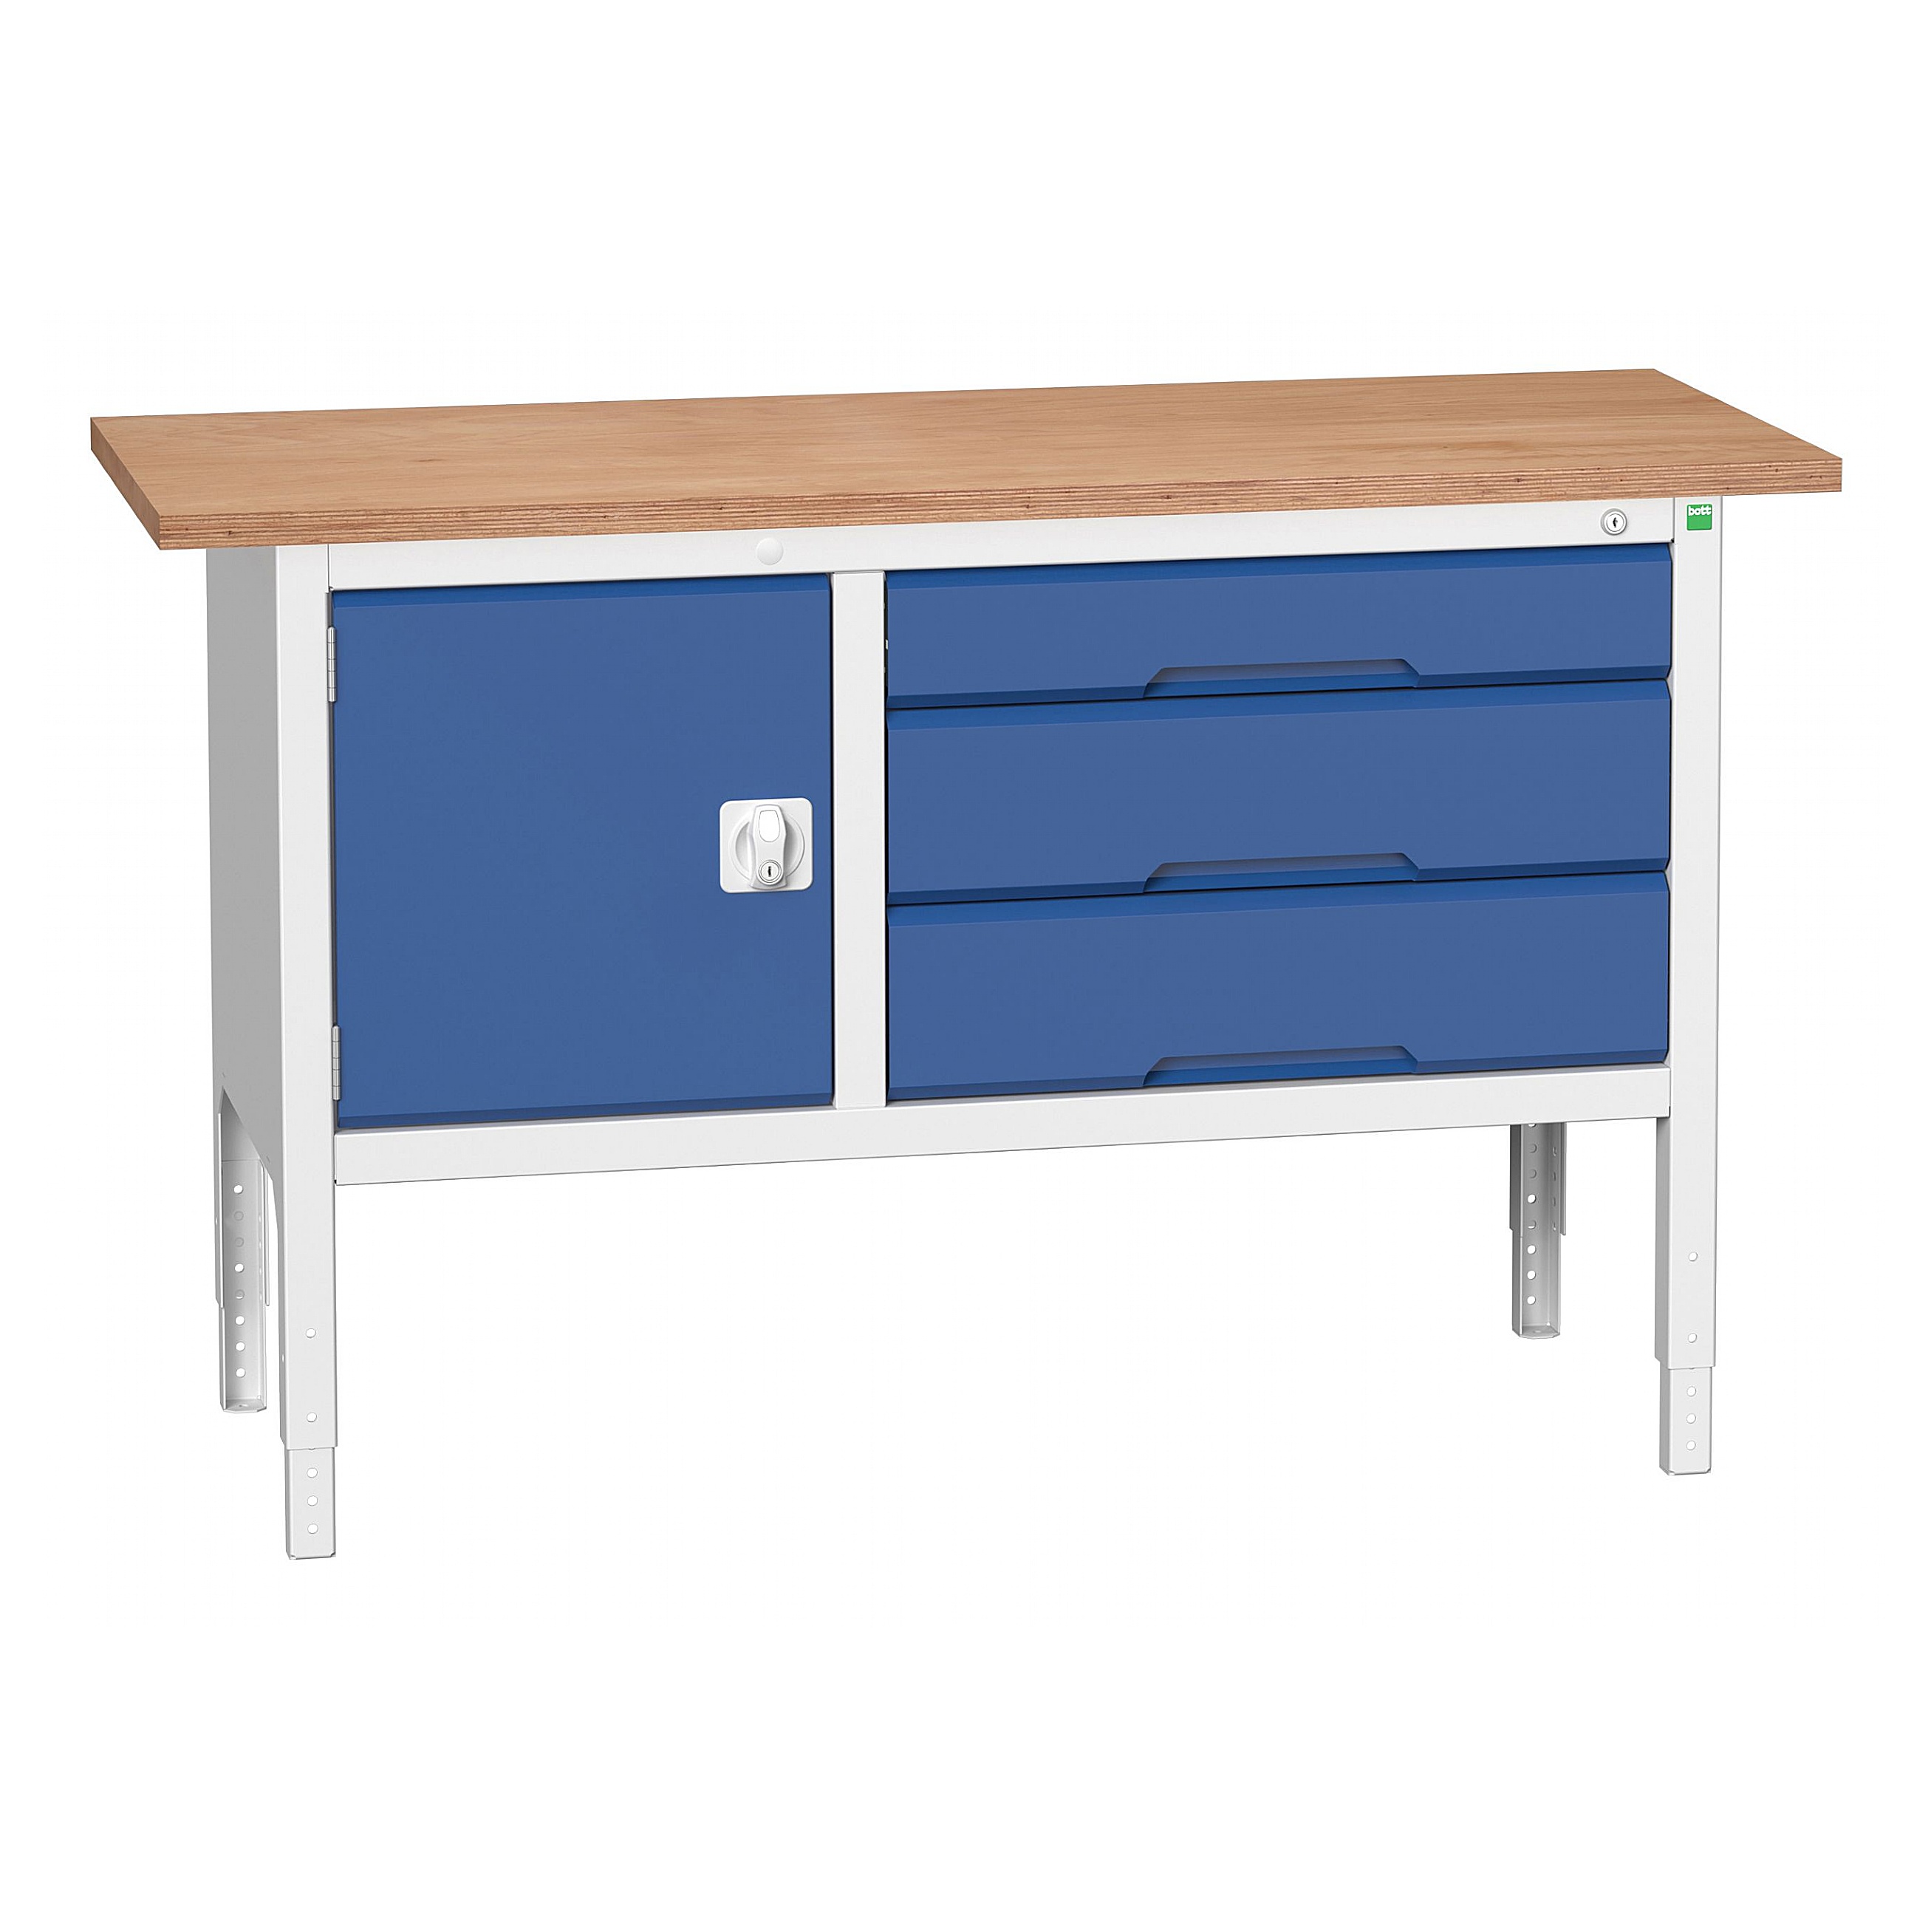 Height Adjustable Storage Workbench, Cupboard & Drawers from our ...